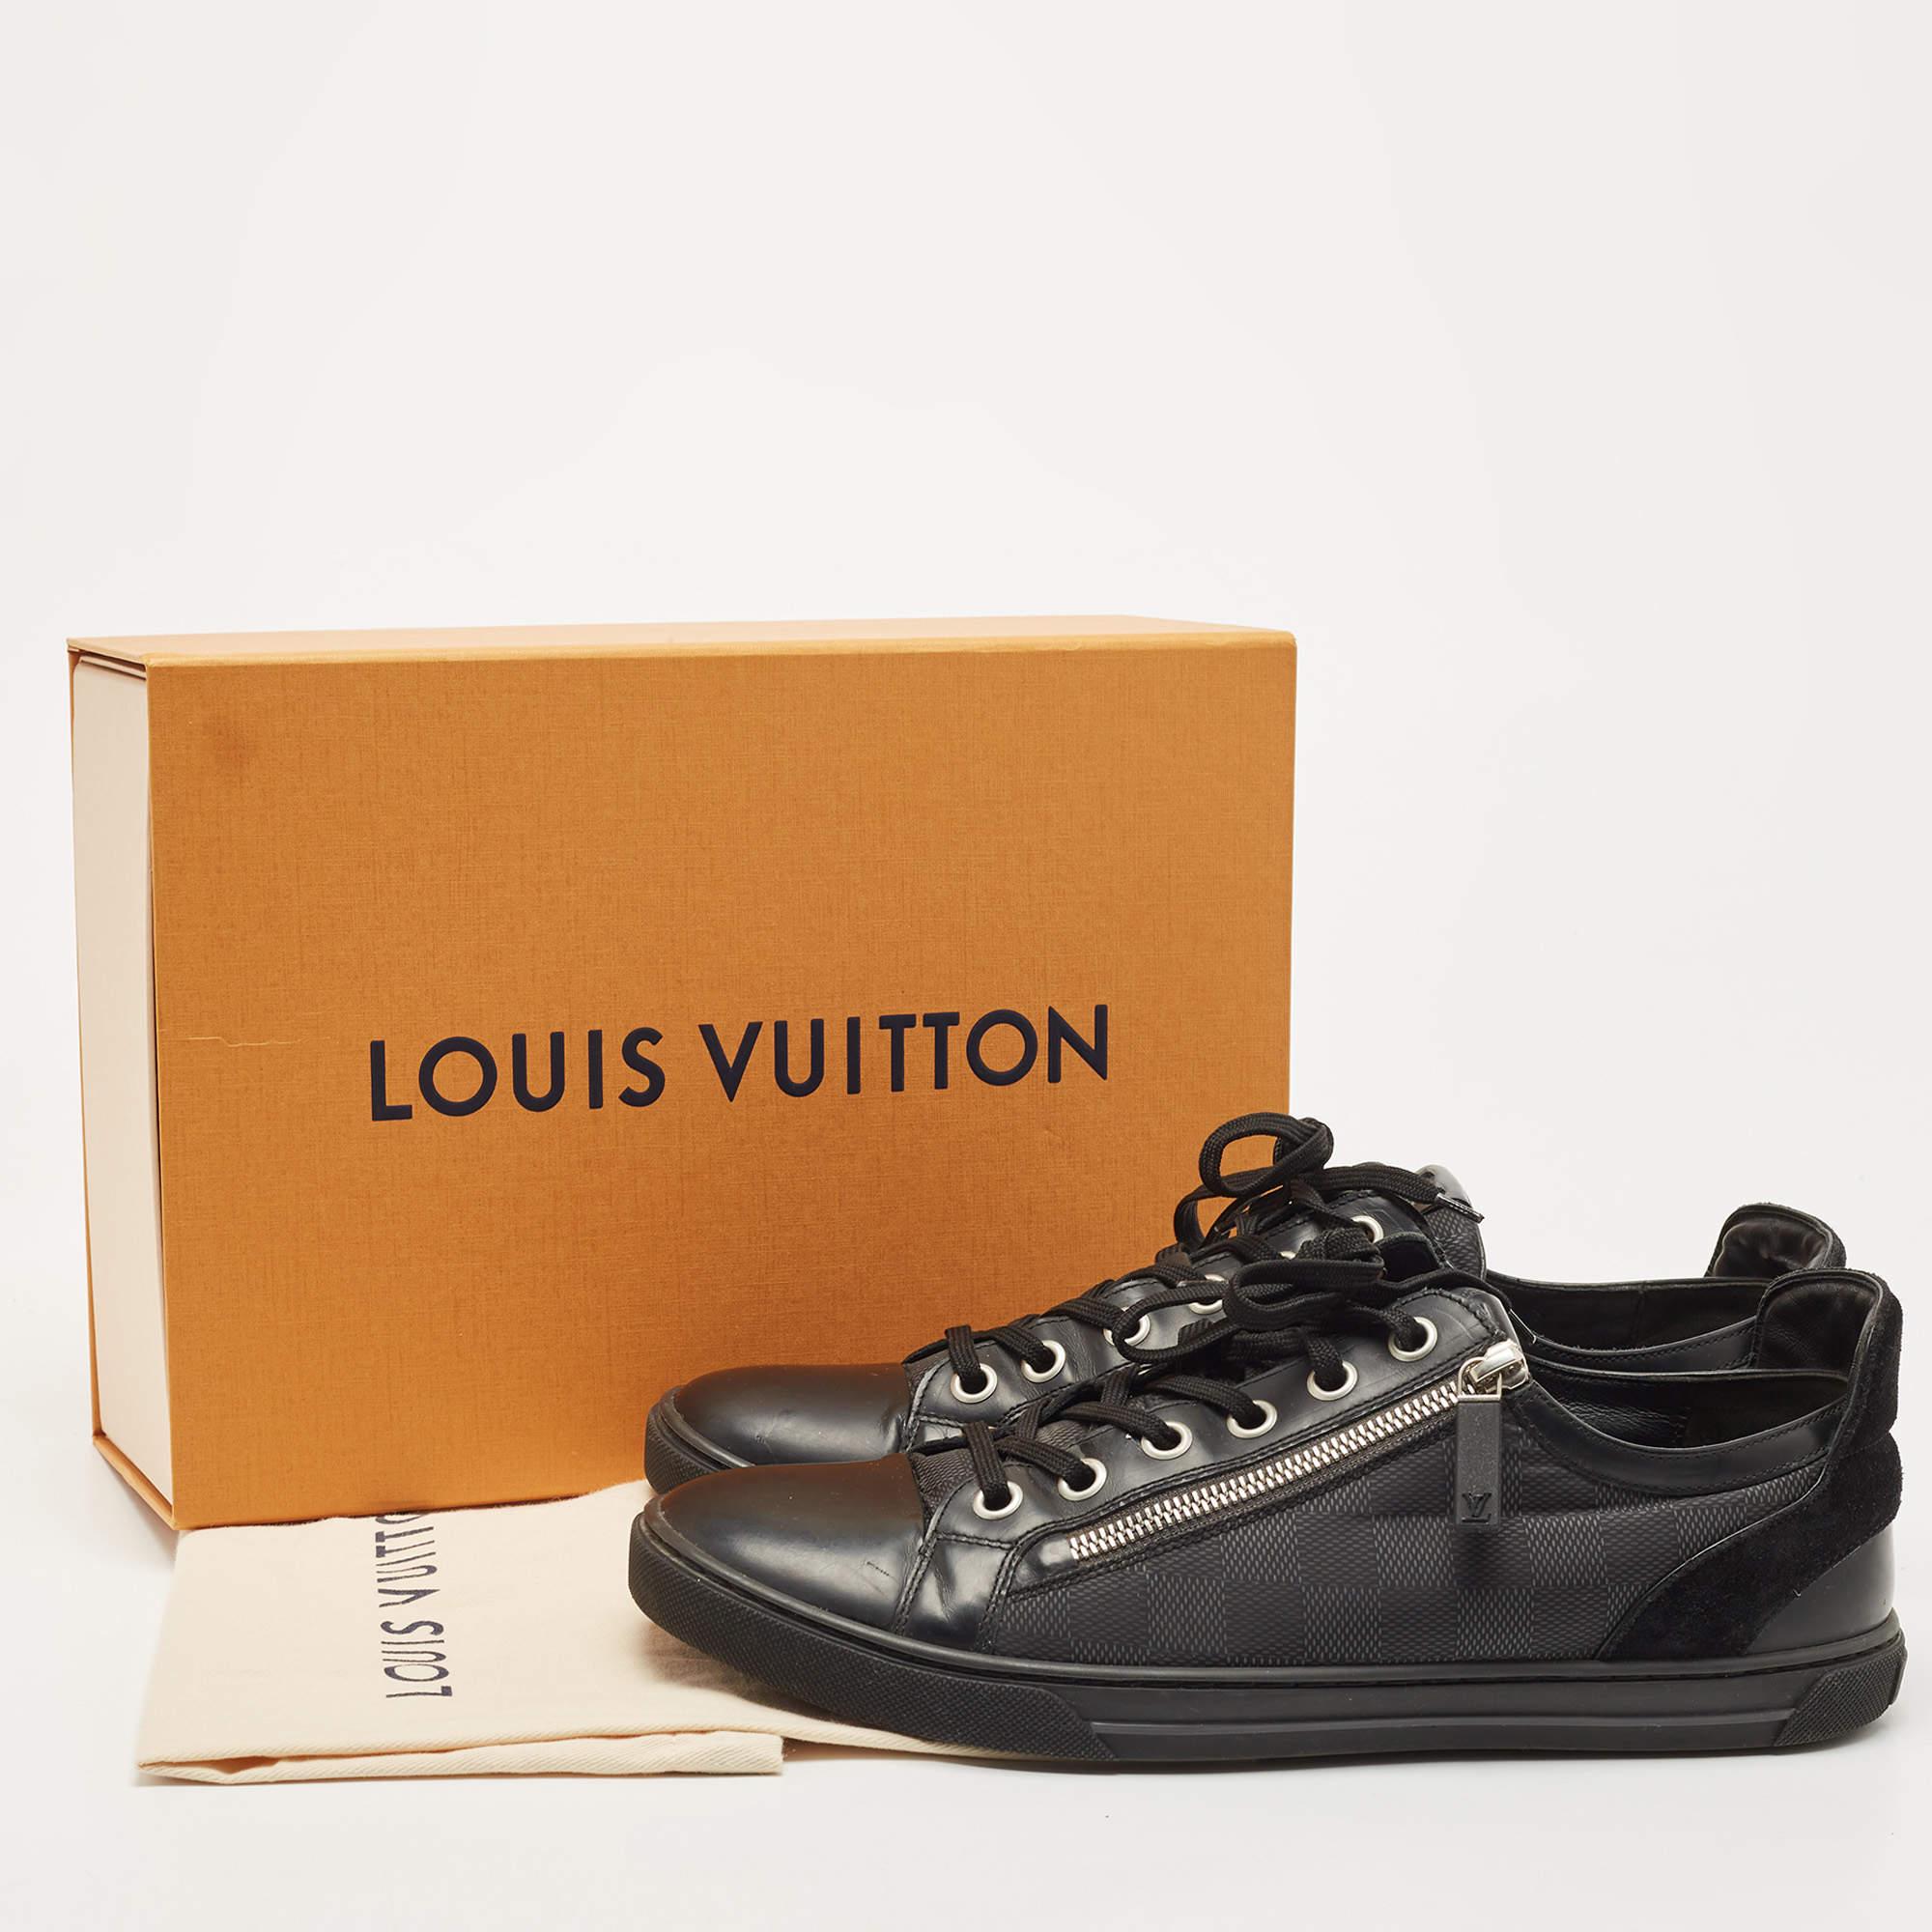 Louis Vuitton Black Leather and Damier Ebene Canvas Low Top Sneakers Size 42.5 For Sale 6